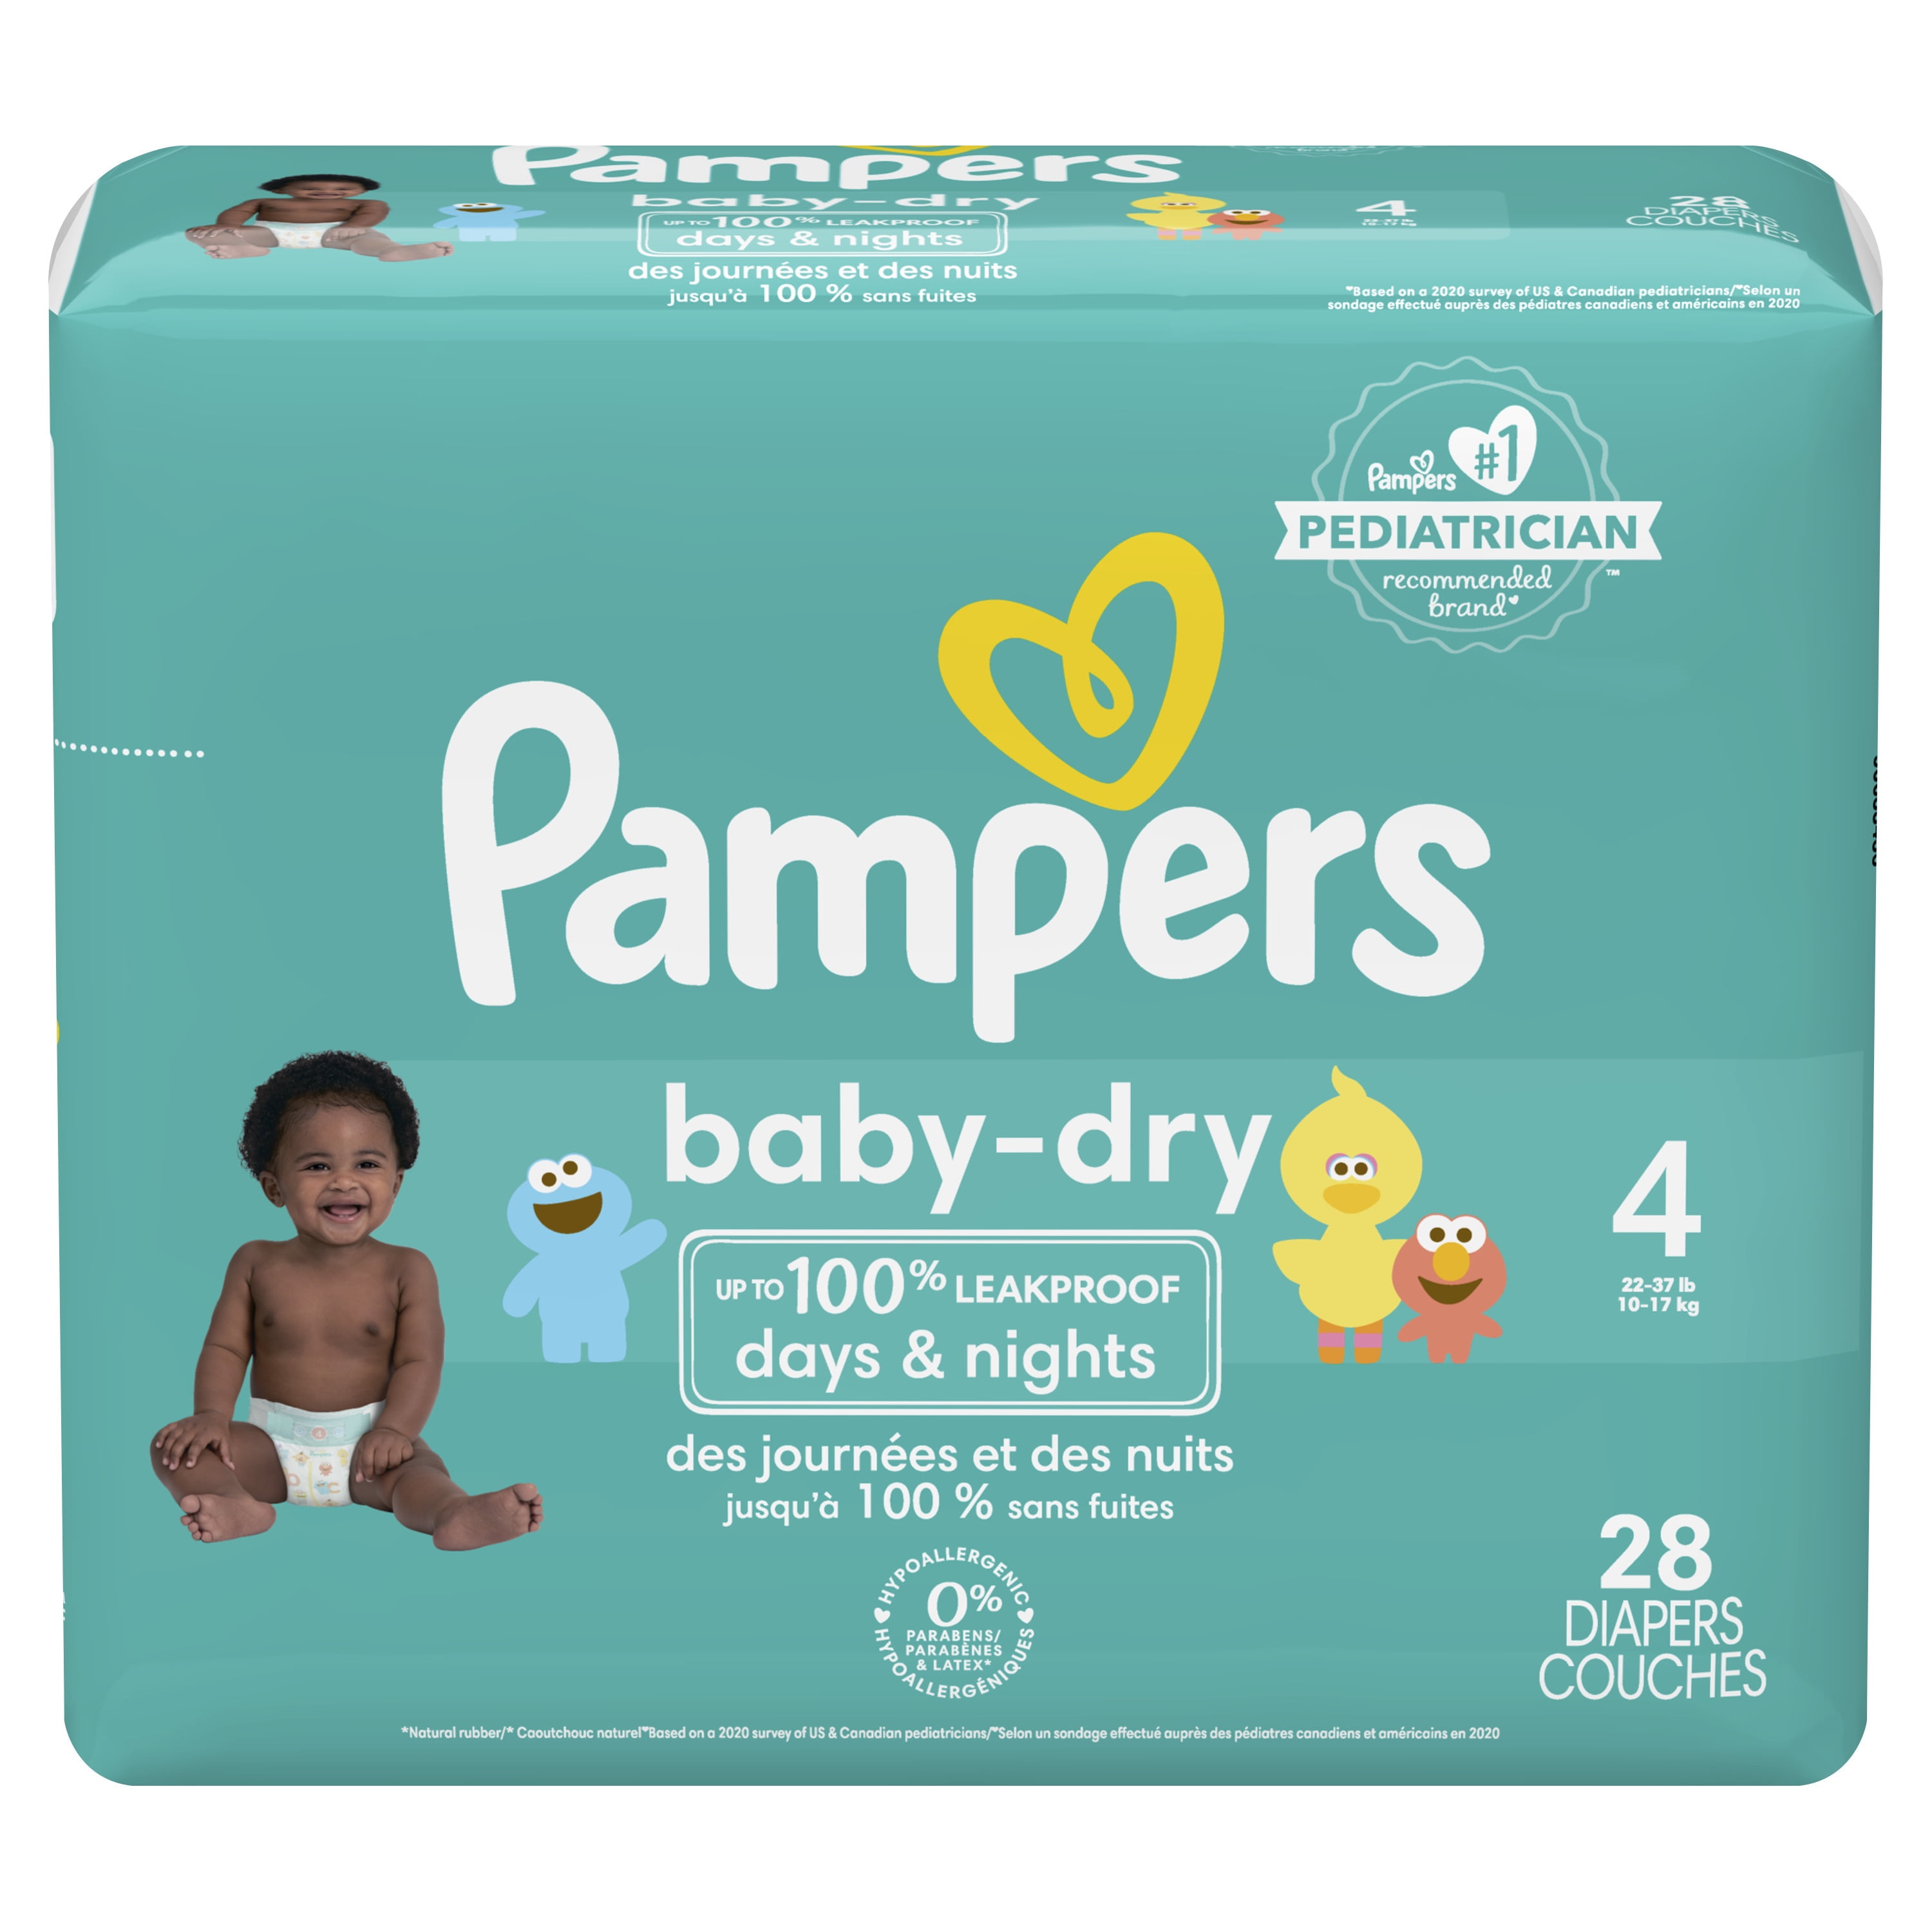 Ontvangende machine Vriendin Tussendoortje Pampers Baby Dry Diapers Size 4, 28 Count (Select for More Options) -  Walmart.com